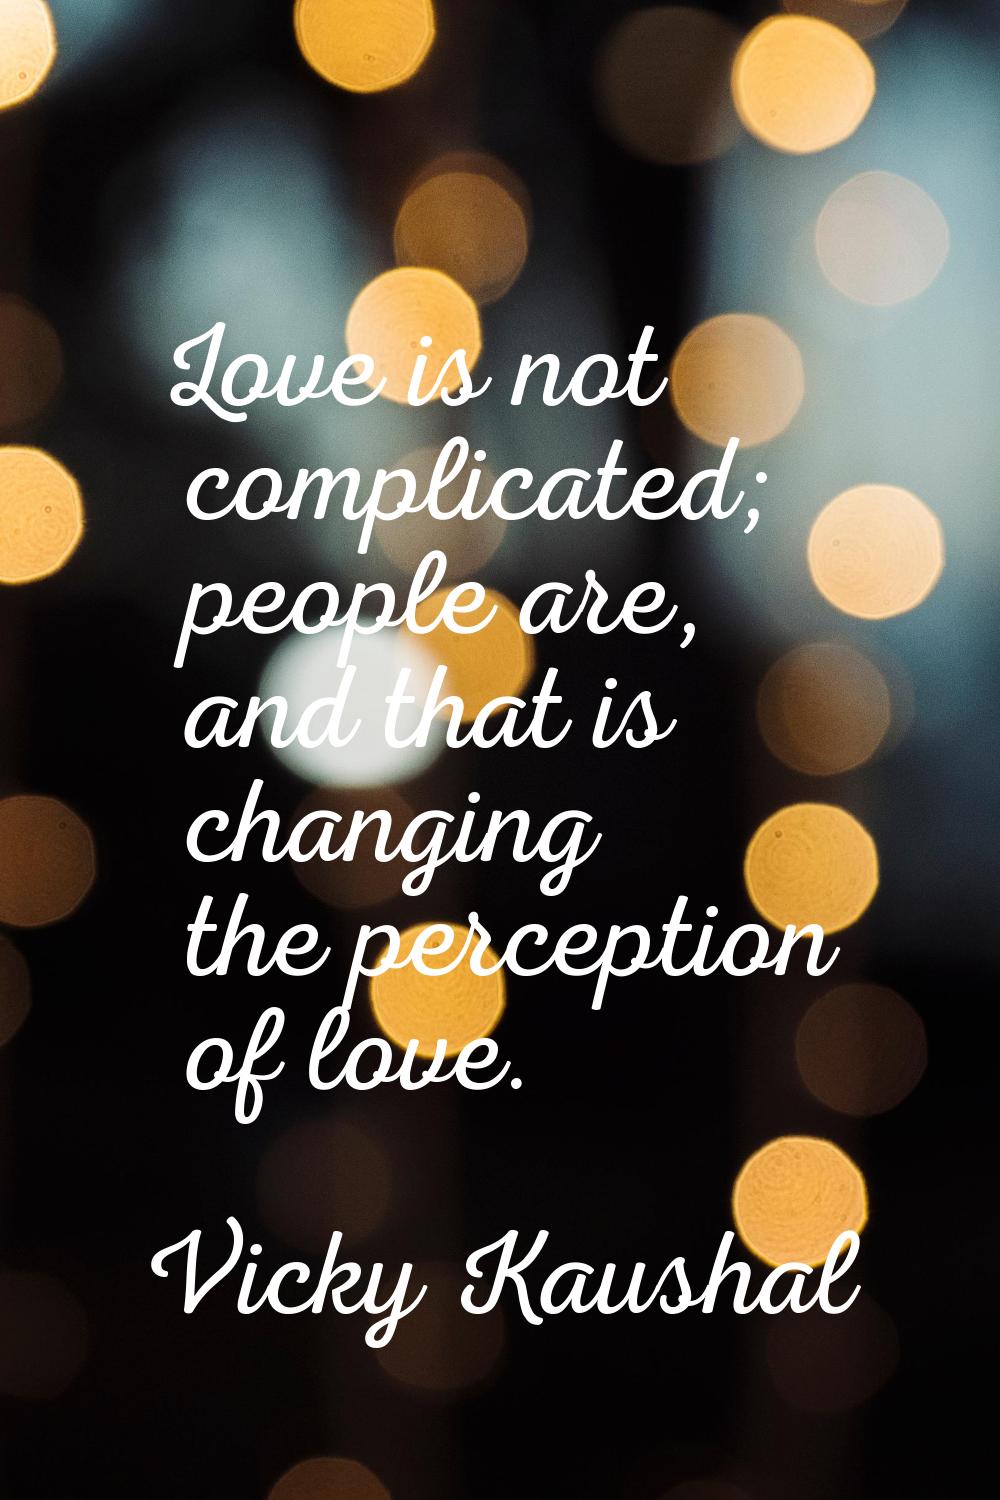 Love is not complicated; people are, and that is changing the perception of love.